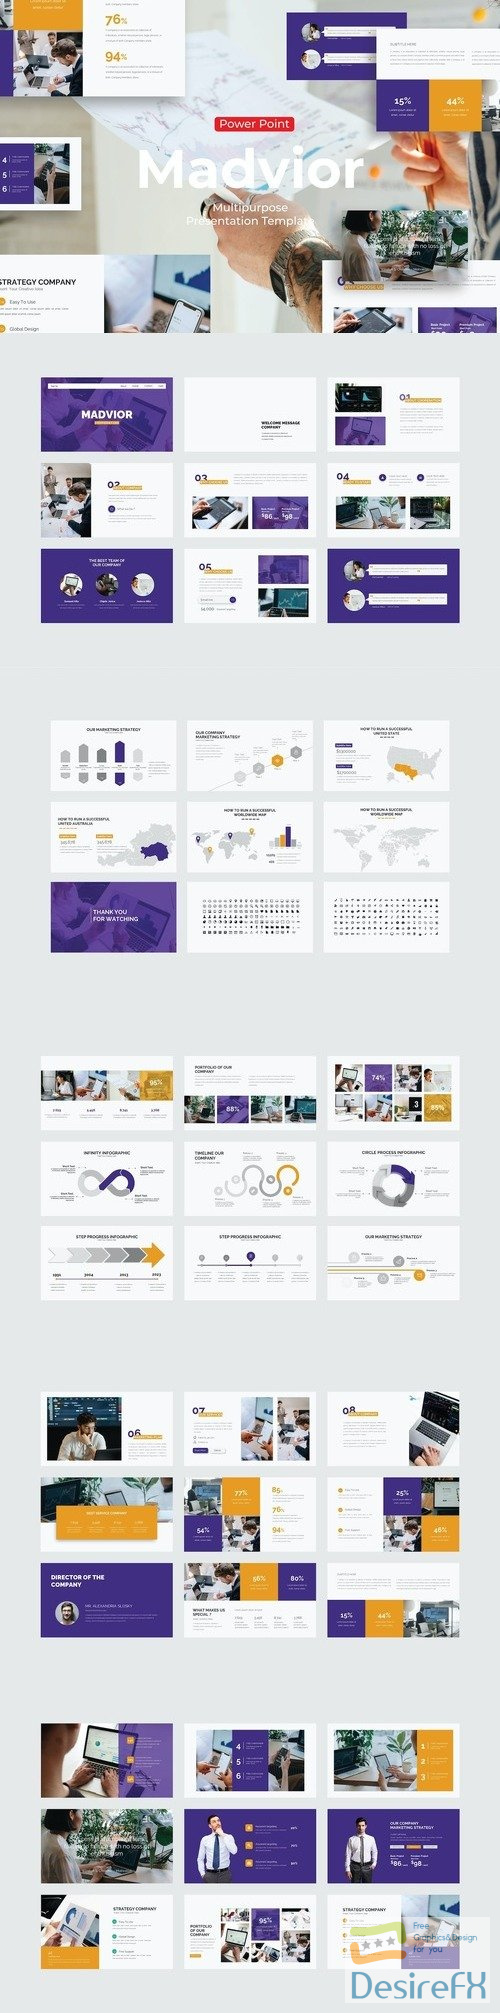 Madvior - PowerPoint Template